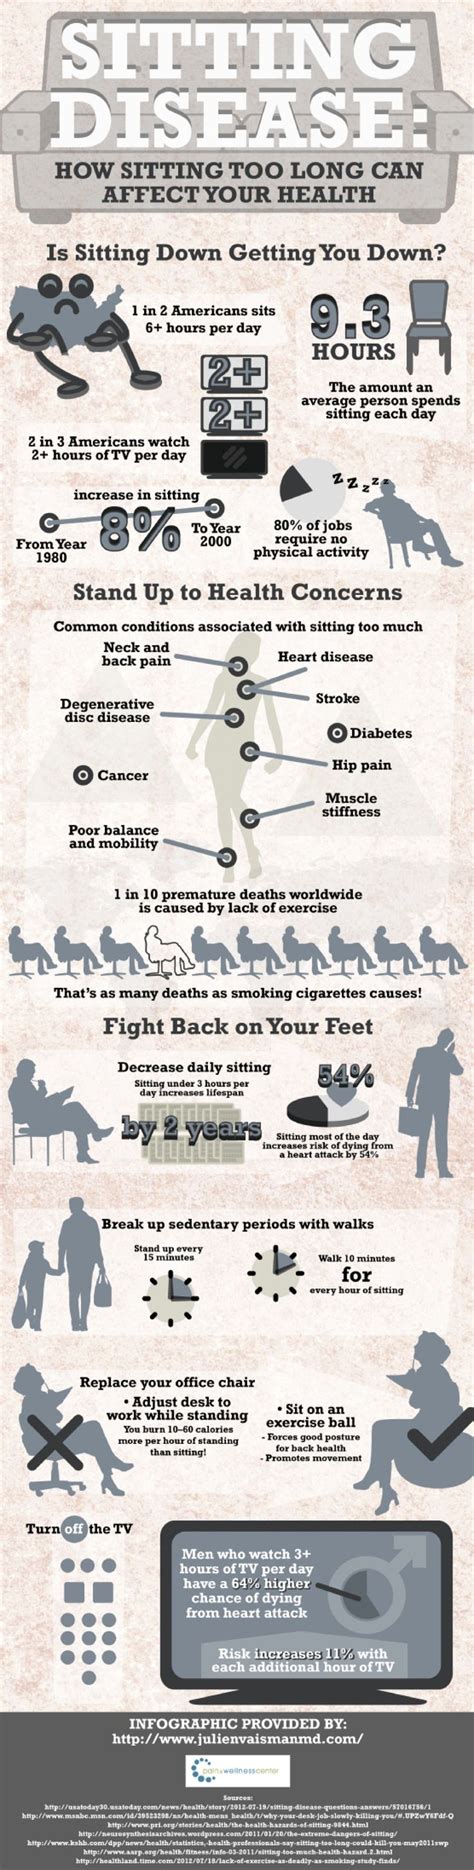 Health Infographic How Sitting Too Long Can Affect Your Health